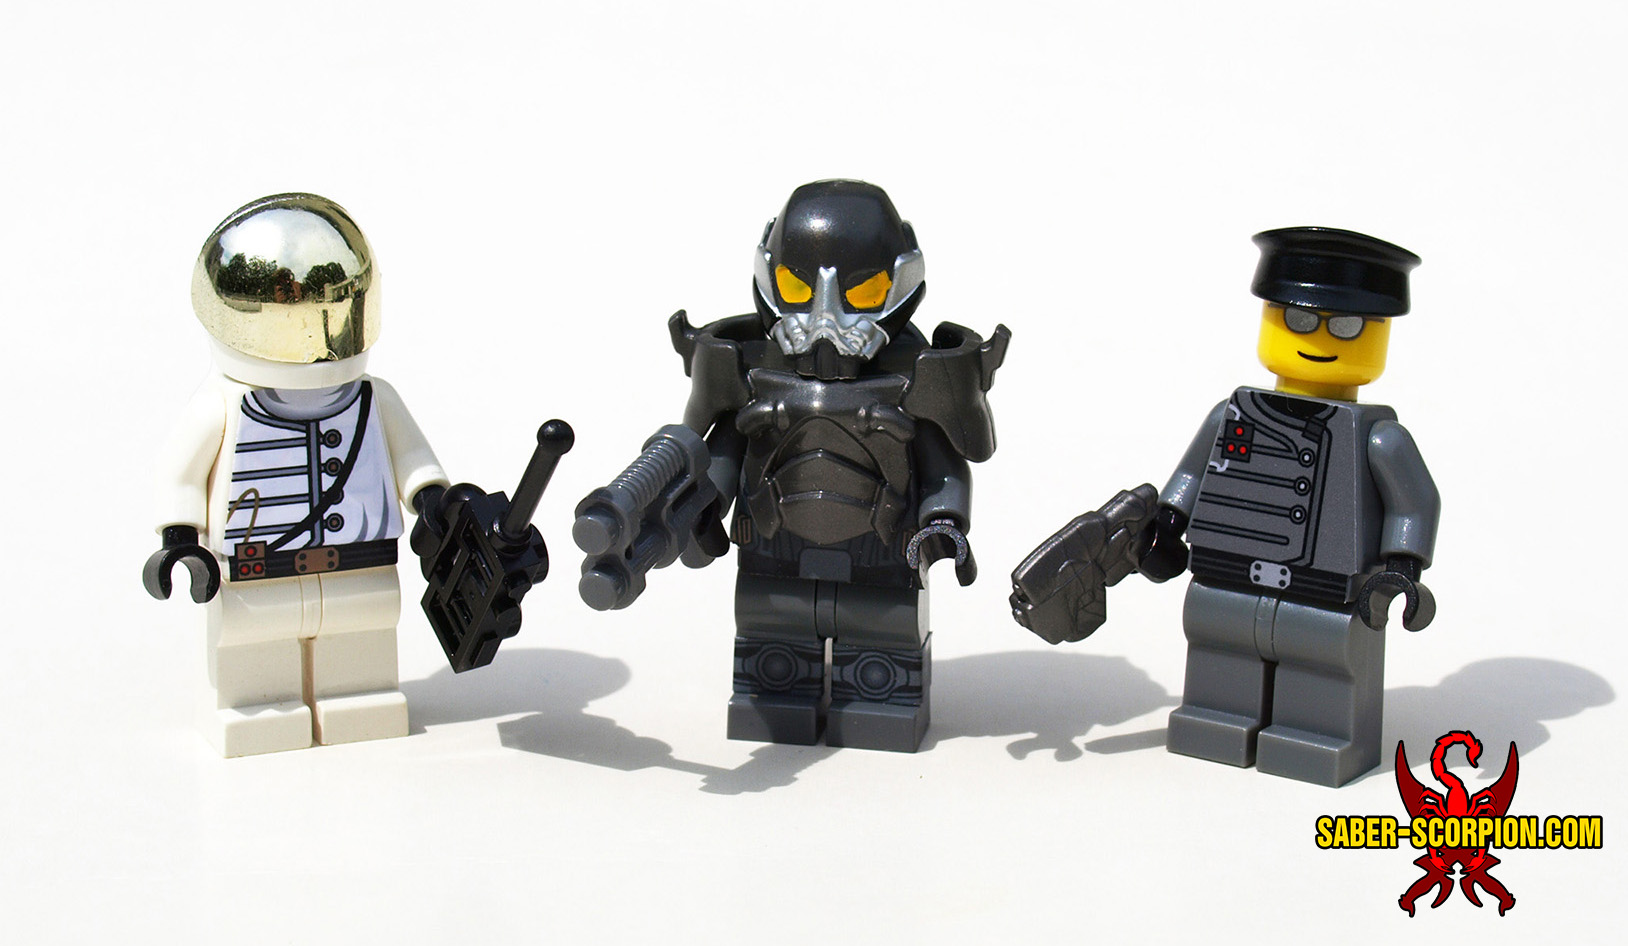 Post-Apoc Government Agents & Advanced Power-Suit